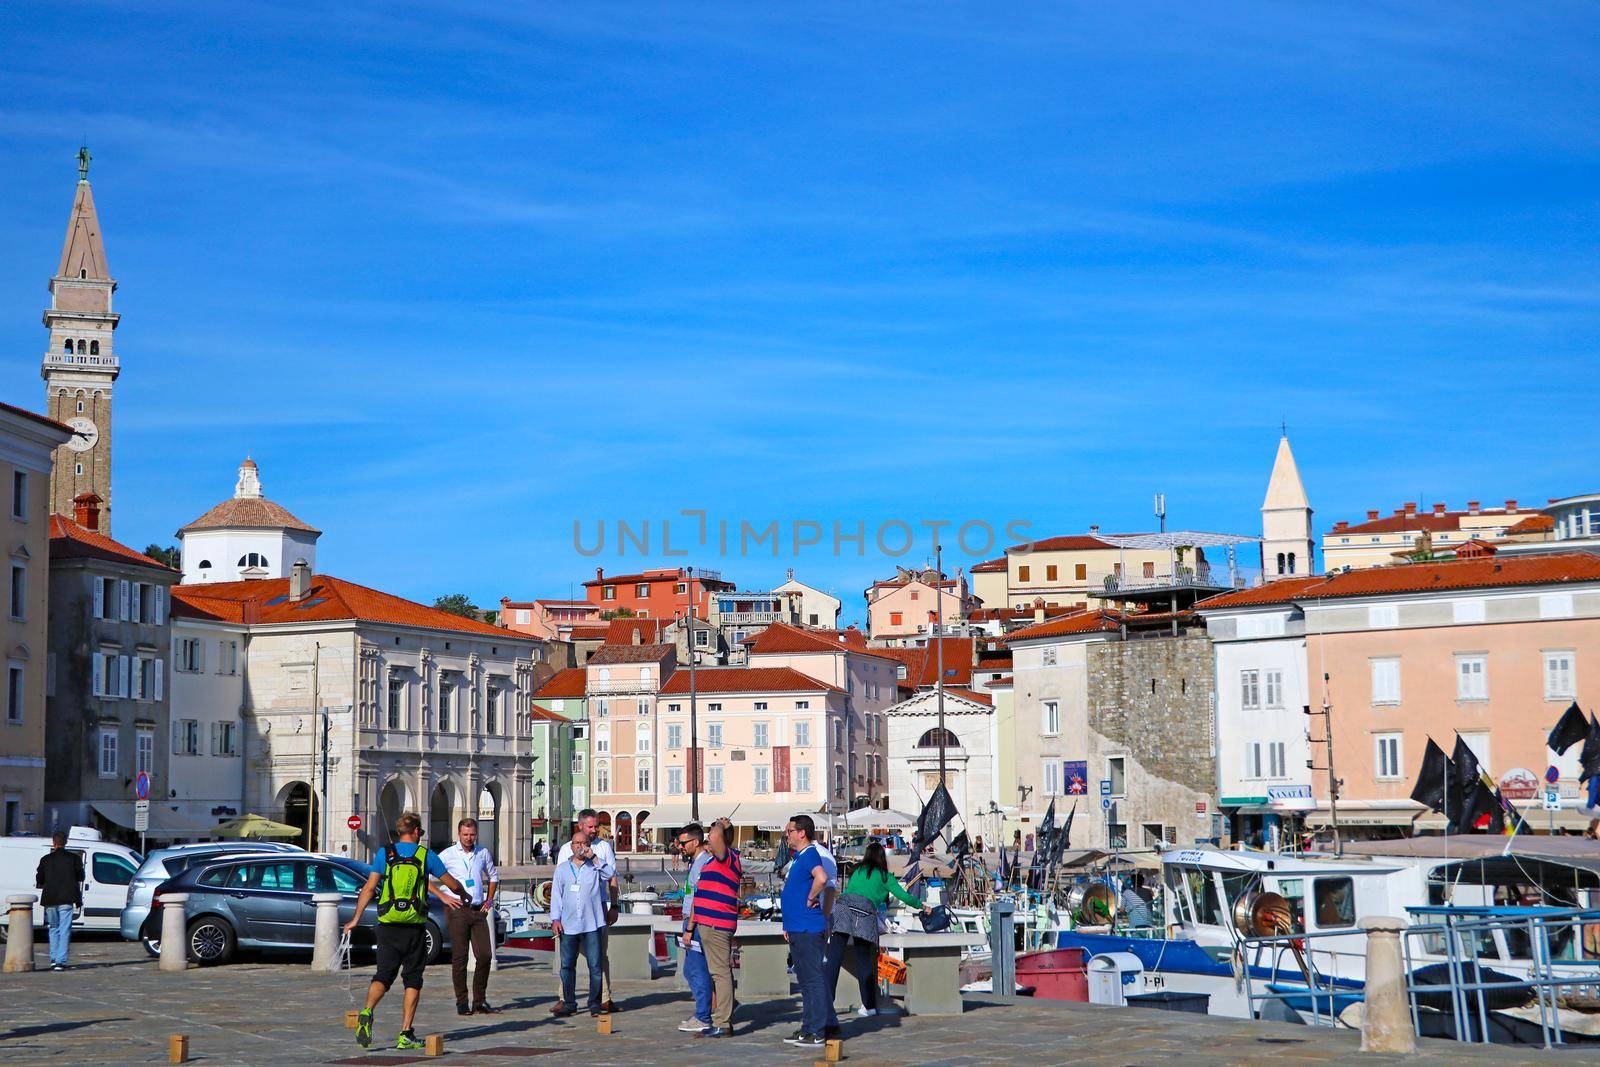 Piran, Slovenia, September 30, 2019: the central square in the city of Piran. by kip02kas